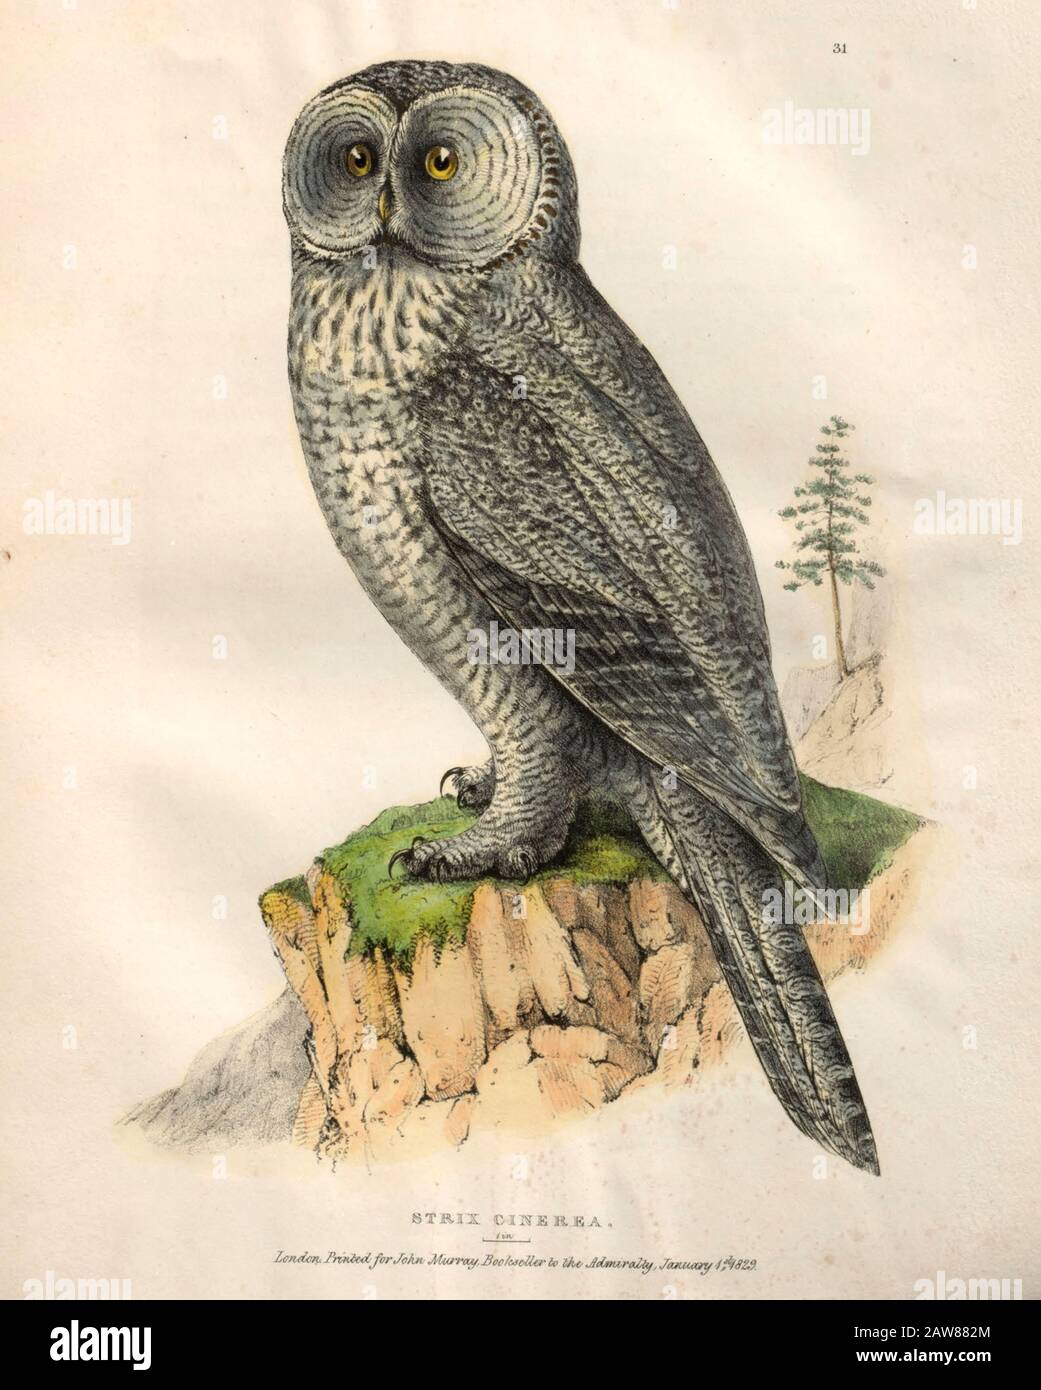 Strix nebulosa (Great Grey Owl) color plate of North American birds from Fauna boreali-americana; or, The zoology of the northern parts of British America, containing descriptions of the objects of natural history collected on the late northern land expeditions under command of Capt. Sir John Franklin by Richardson, John, Sir, 1787-1865 Published 1829 Stock Photo